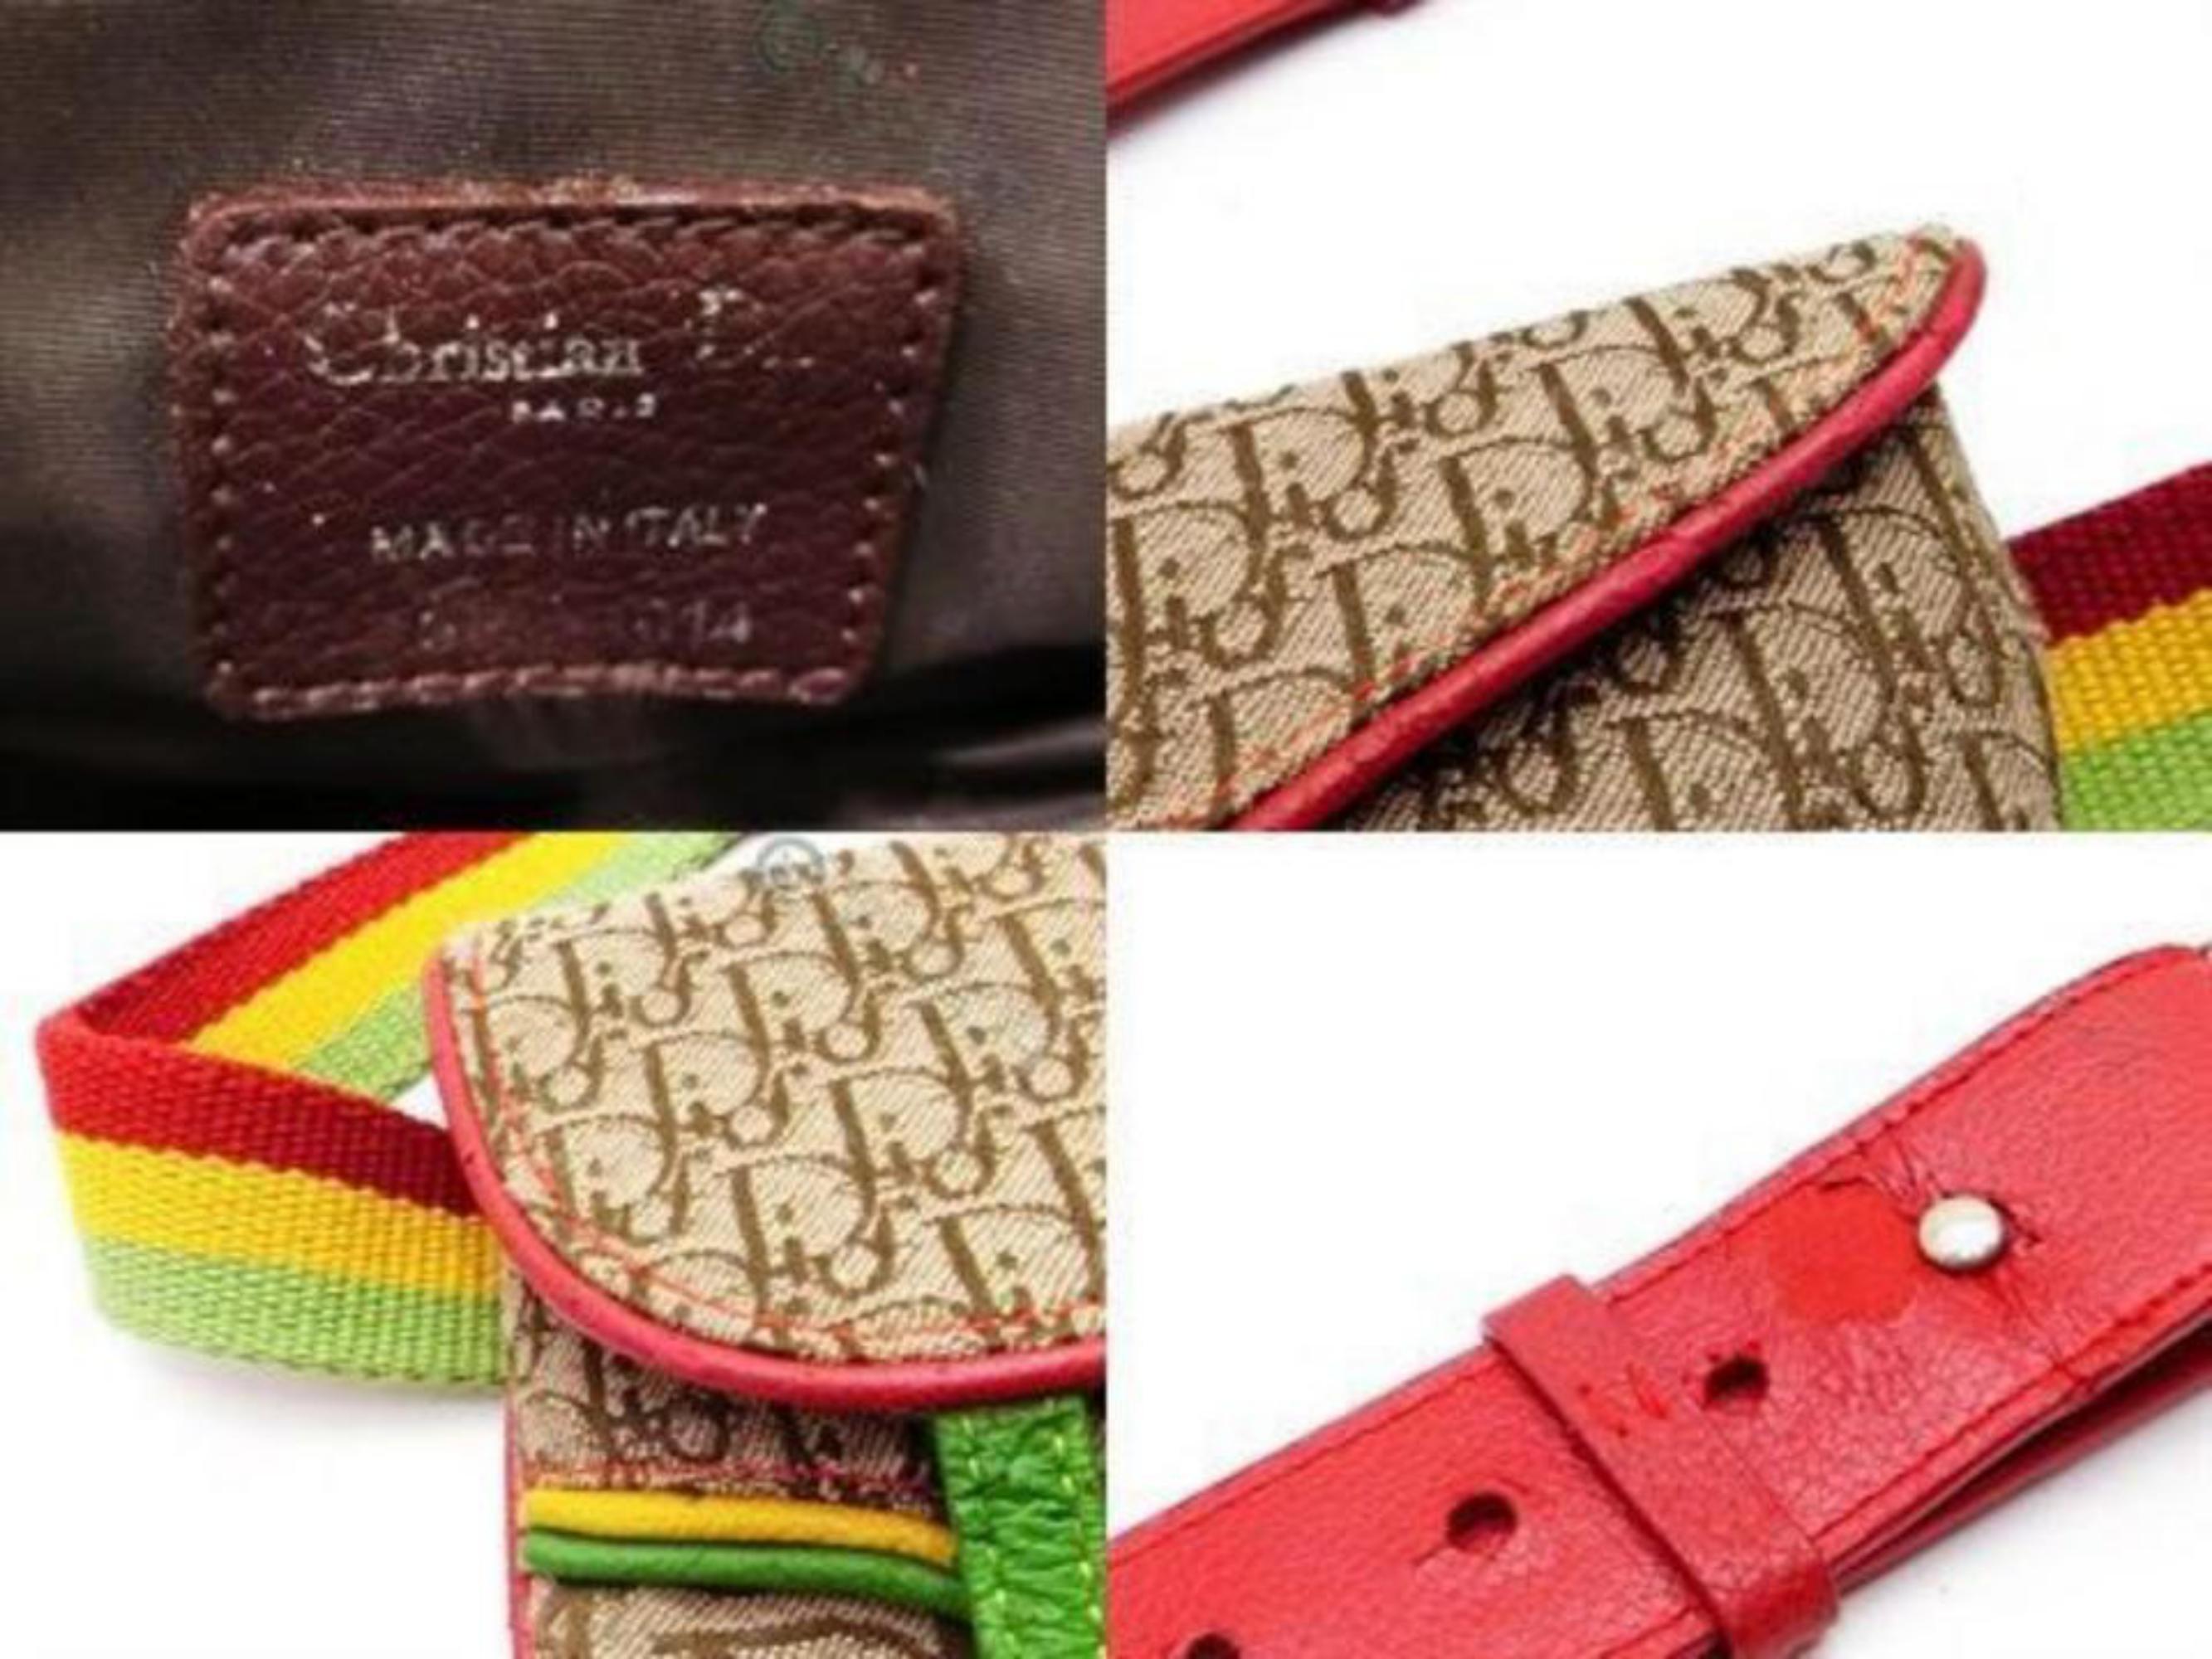 Dior Monogram Trotter Rasta Waist Pouch Bumbag 241080
Date Code/Serial Number: Rubbed Off 014
Made In: Italy
Measurements: Length:  6